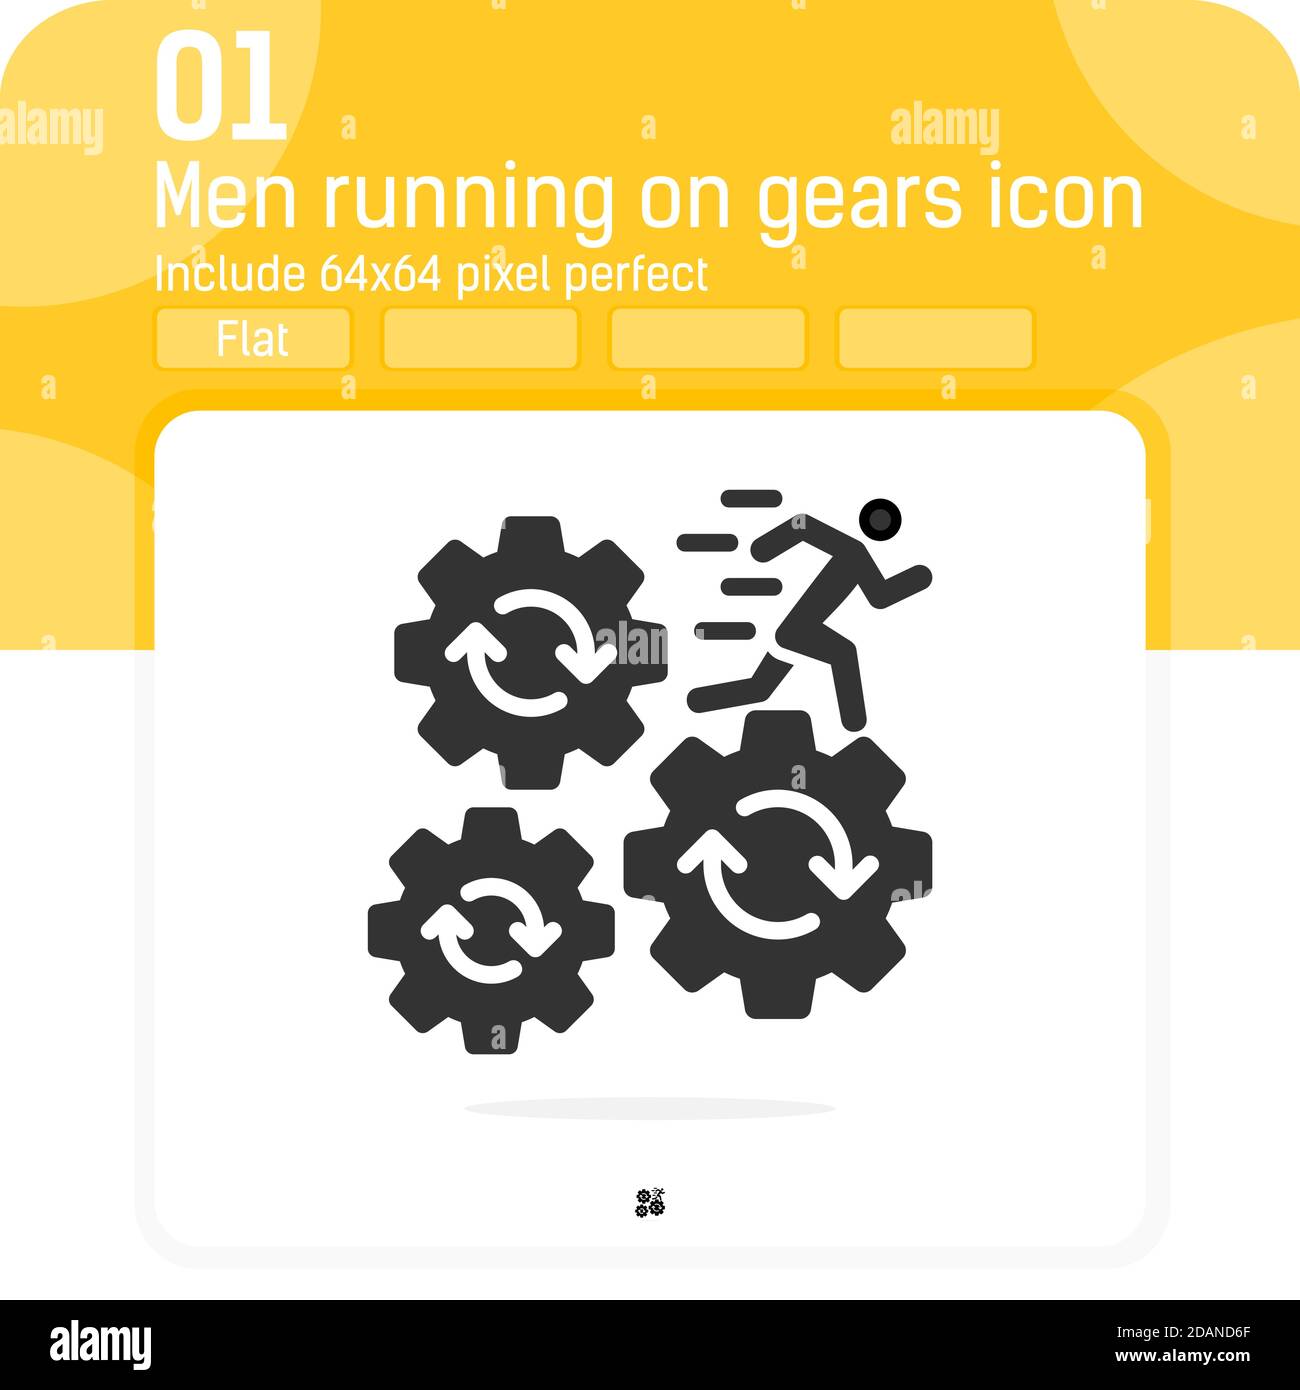 man running on gears icon with flat style isolated on white background. Vector illustration people run on cogwheel sign symbol icon for business Stock Vector